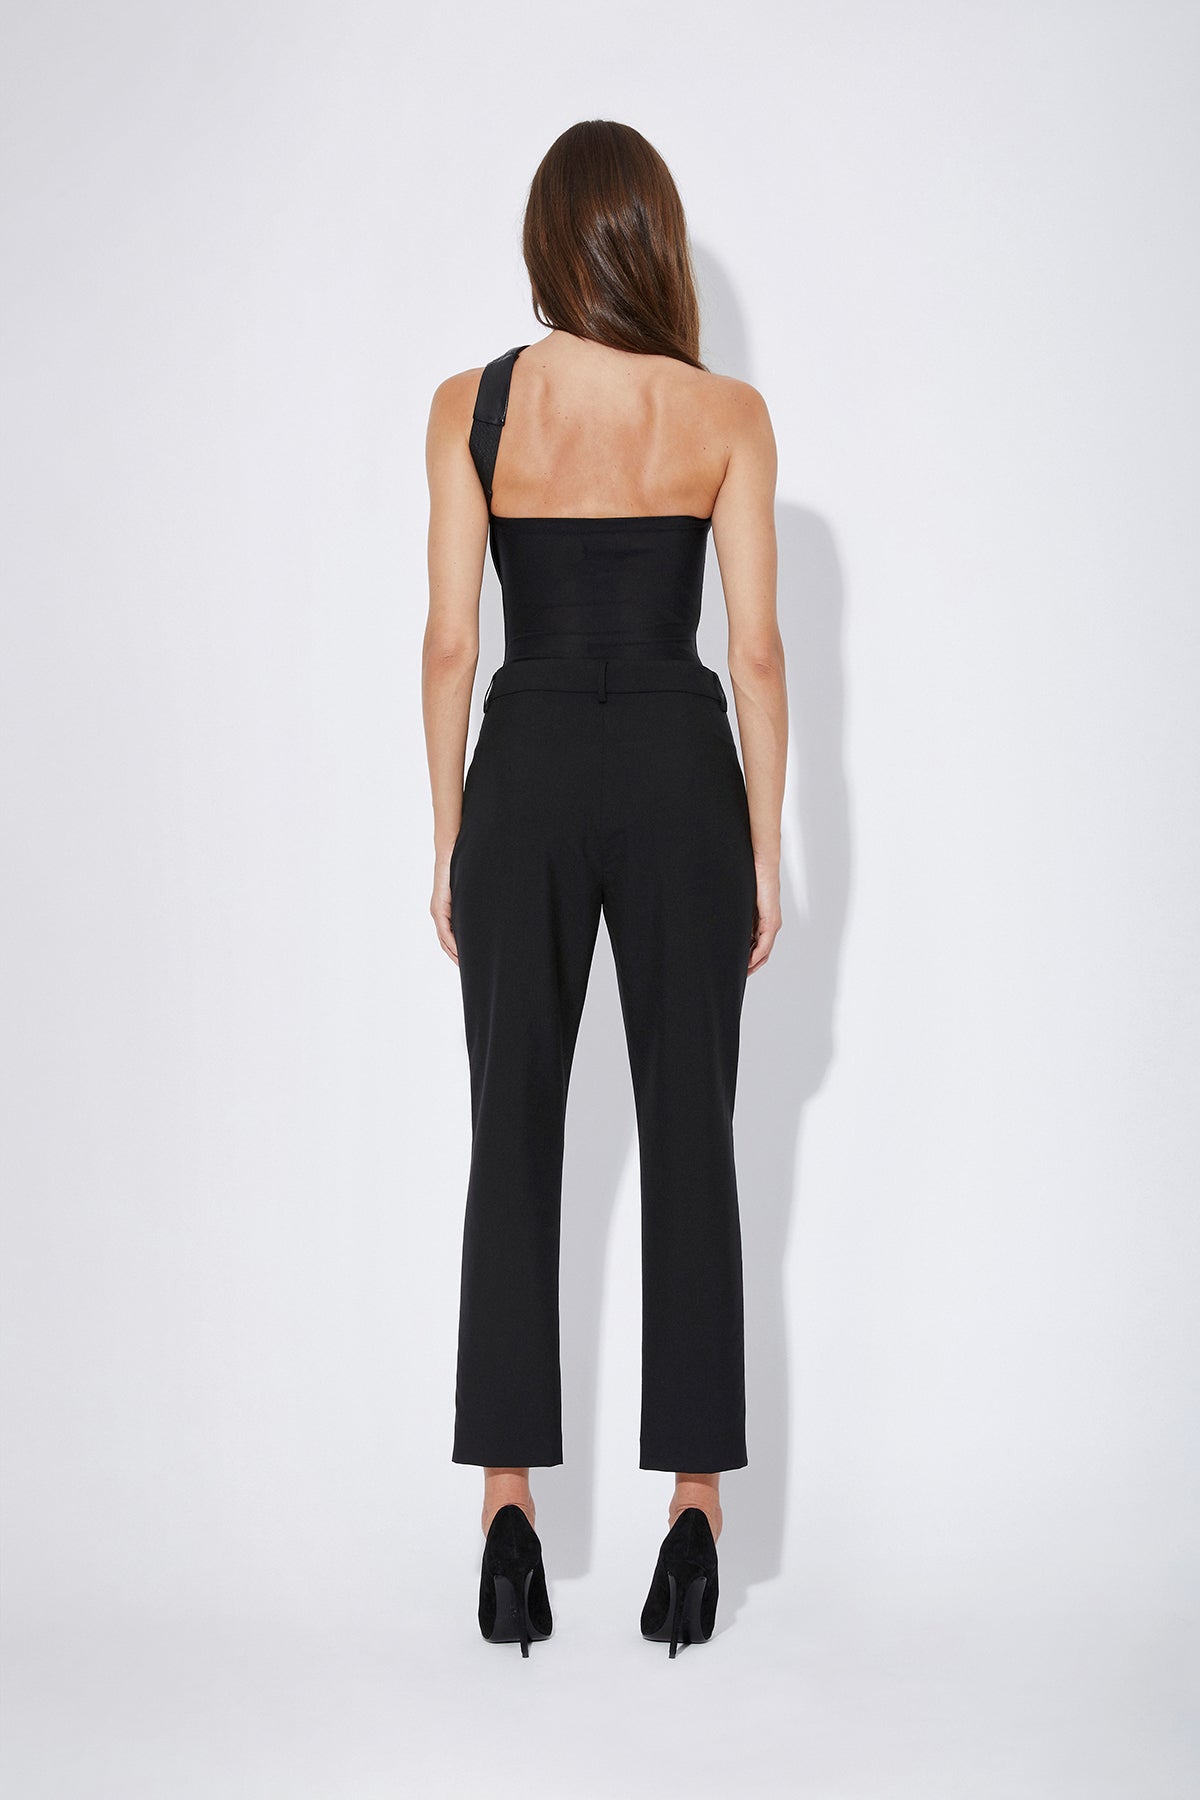 LUCY PANT | BLACK